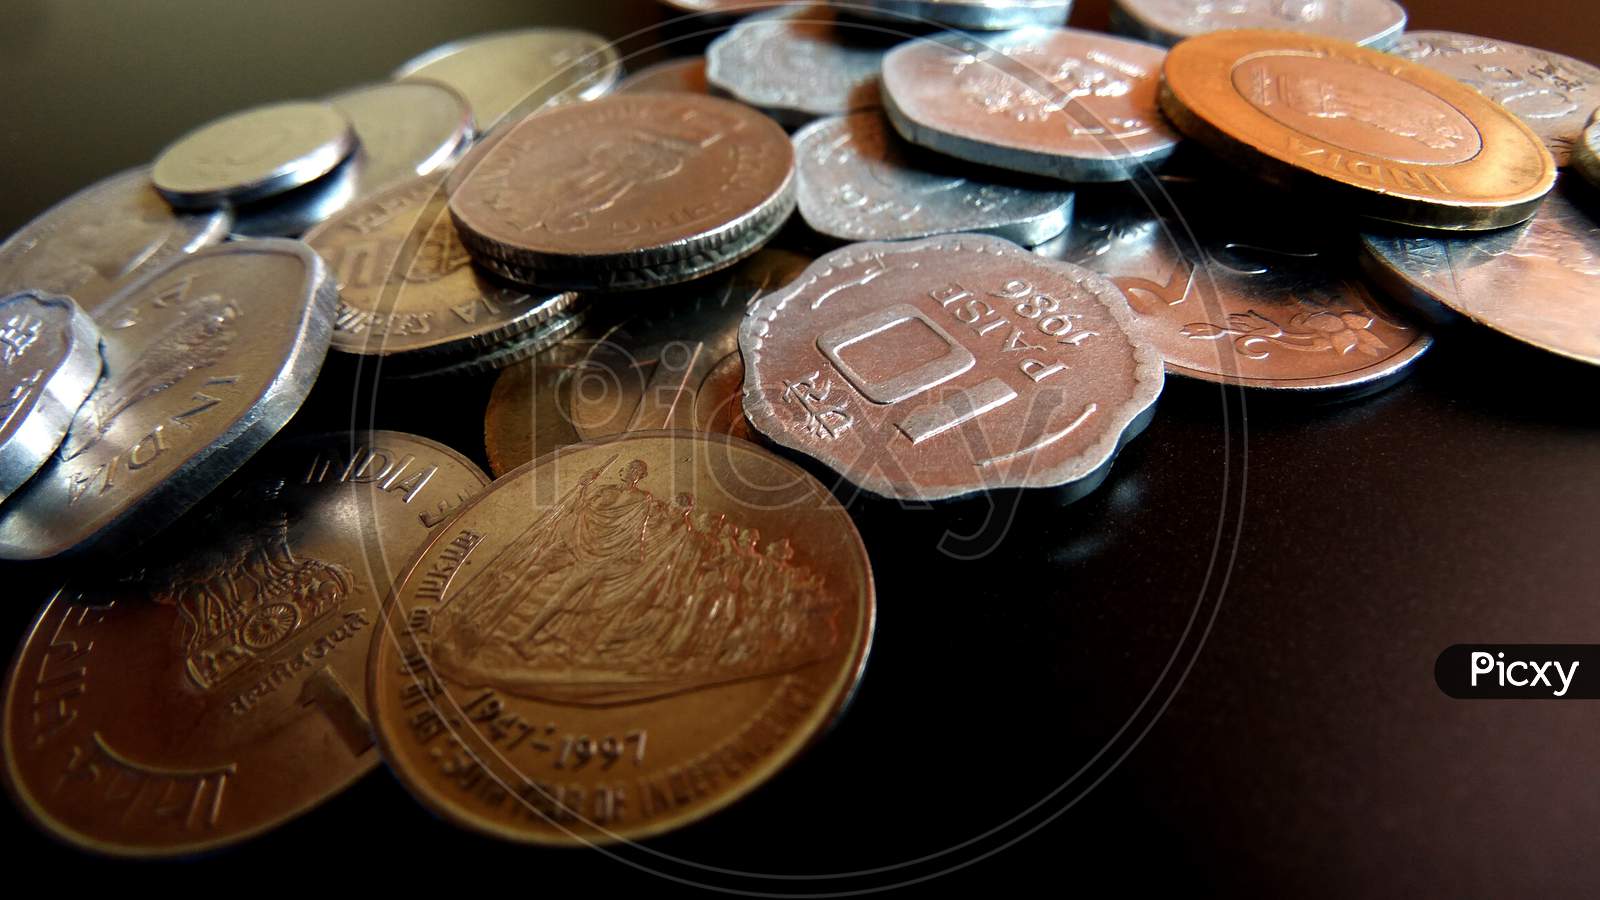 Closeup shot of coins displaying Indian currency of various values on a dark background